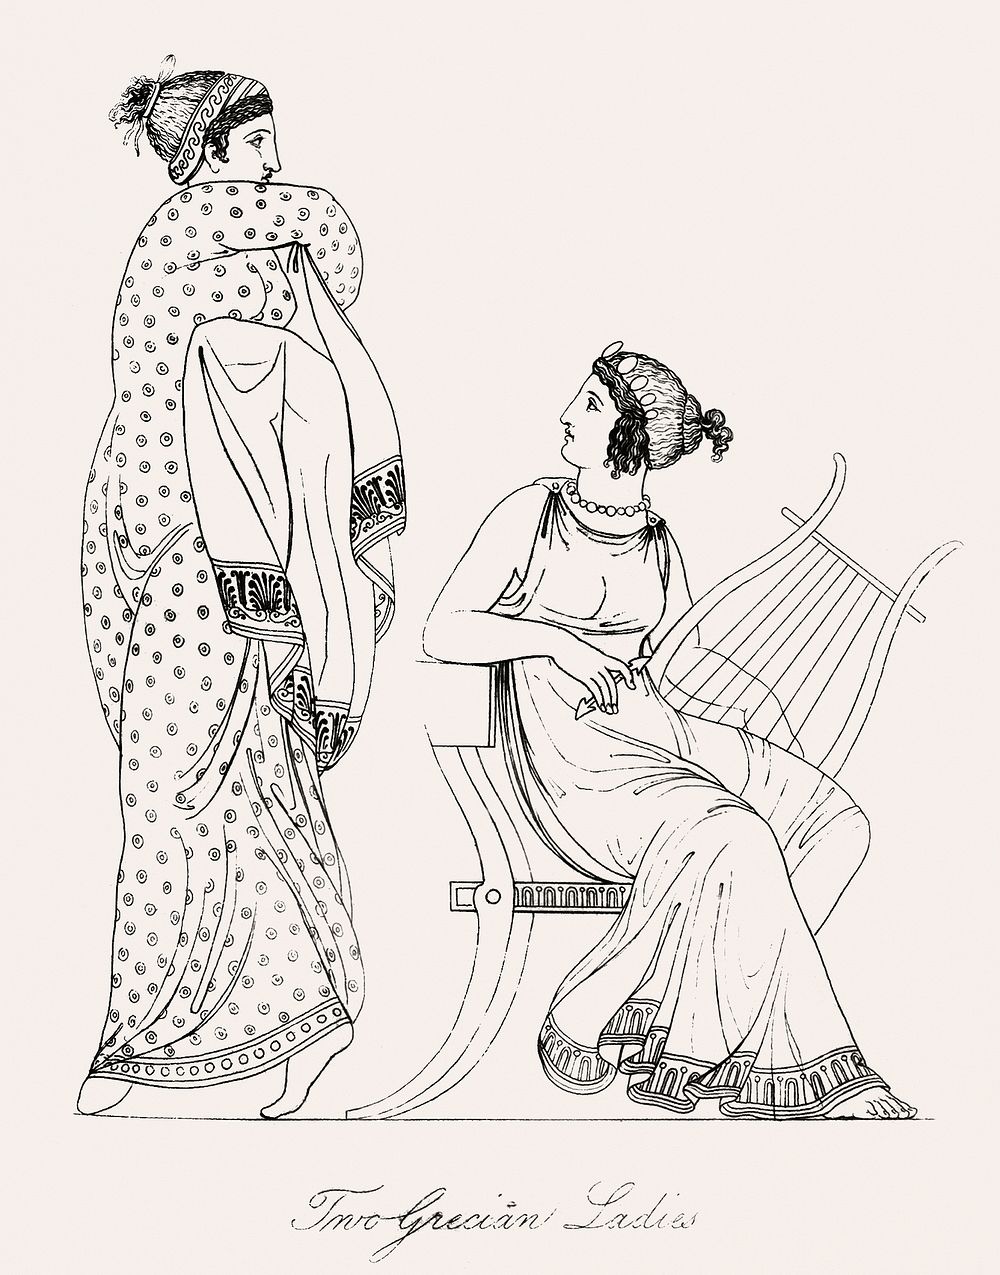 Two Grecian ladies from An illustration of the Egyptian, Grecian and Roman costumes by Thomas Baxter (1782&ndash;1821).…